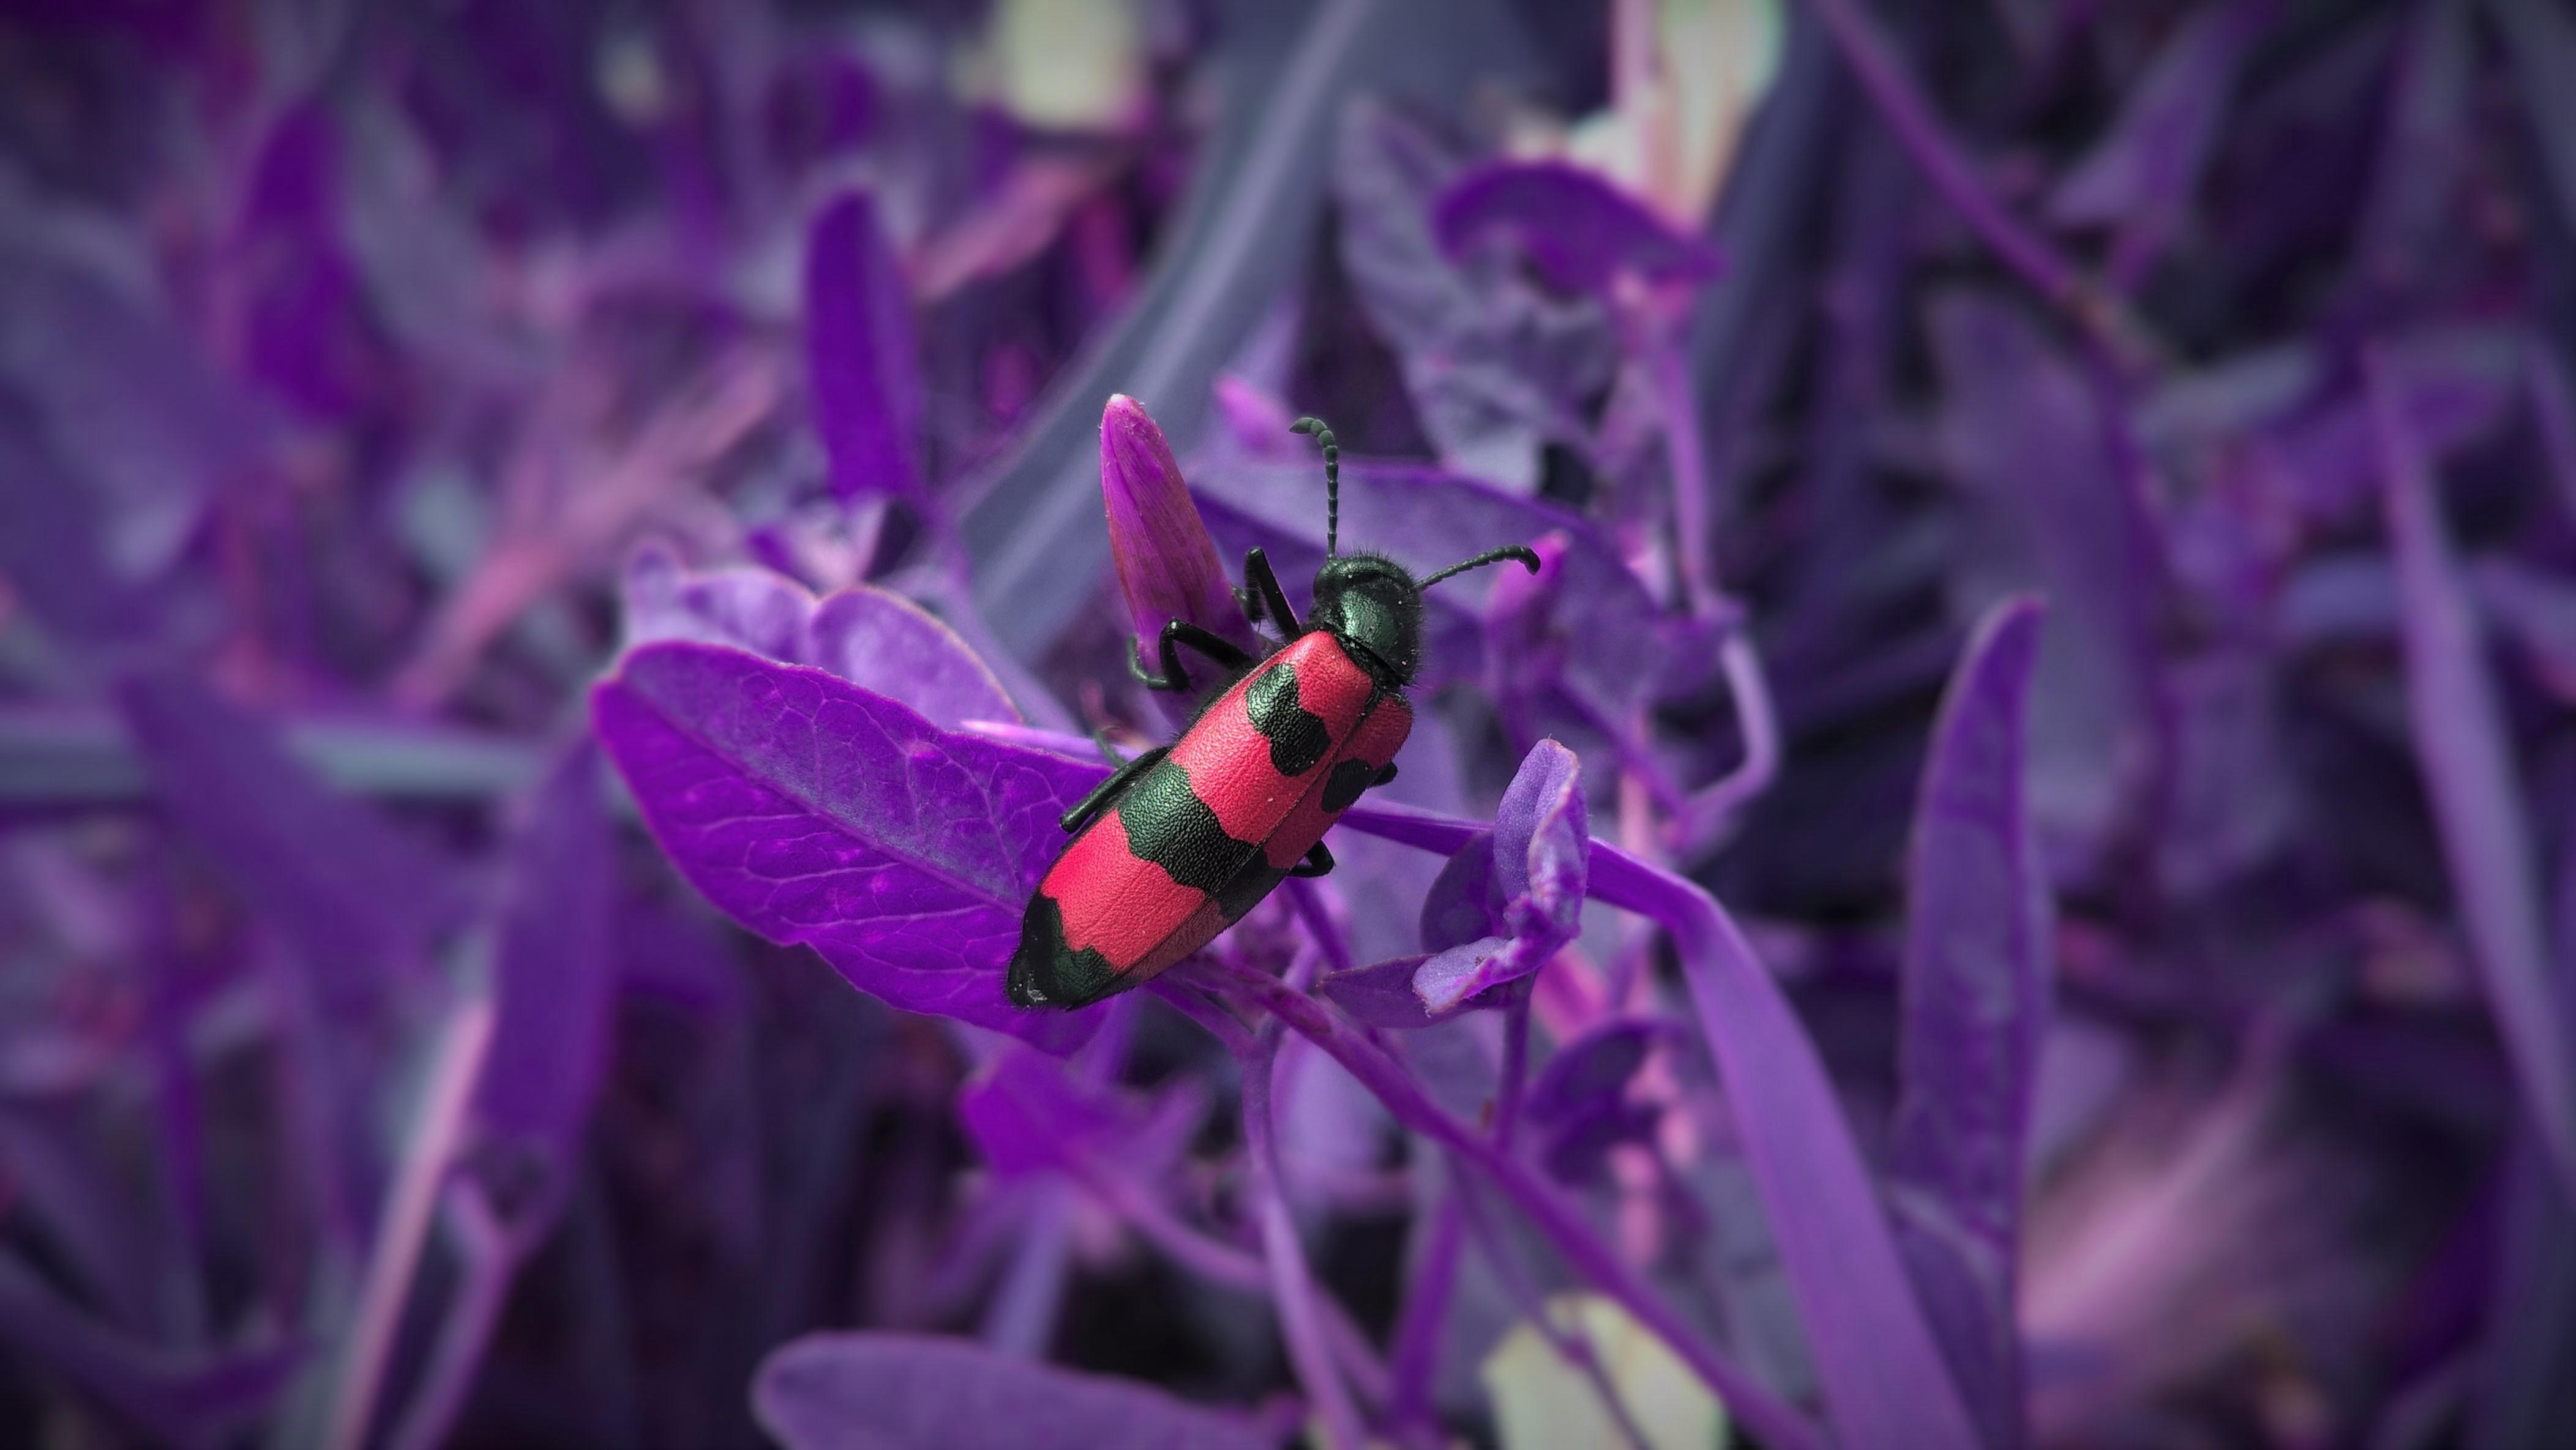 red and black beetle on purple leaf in closeup photography